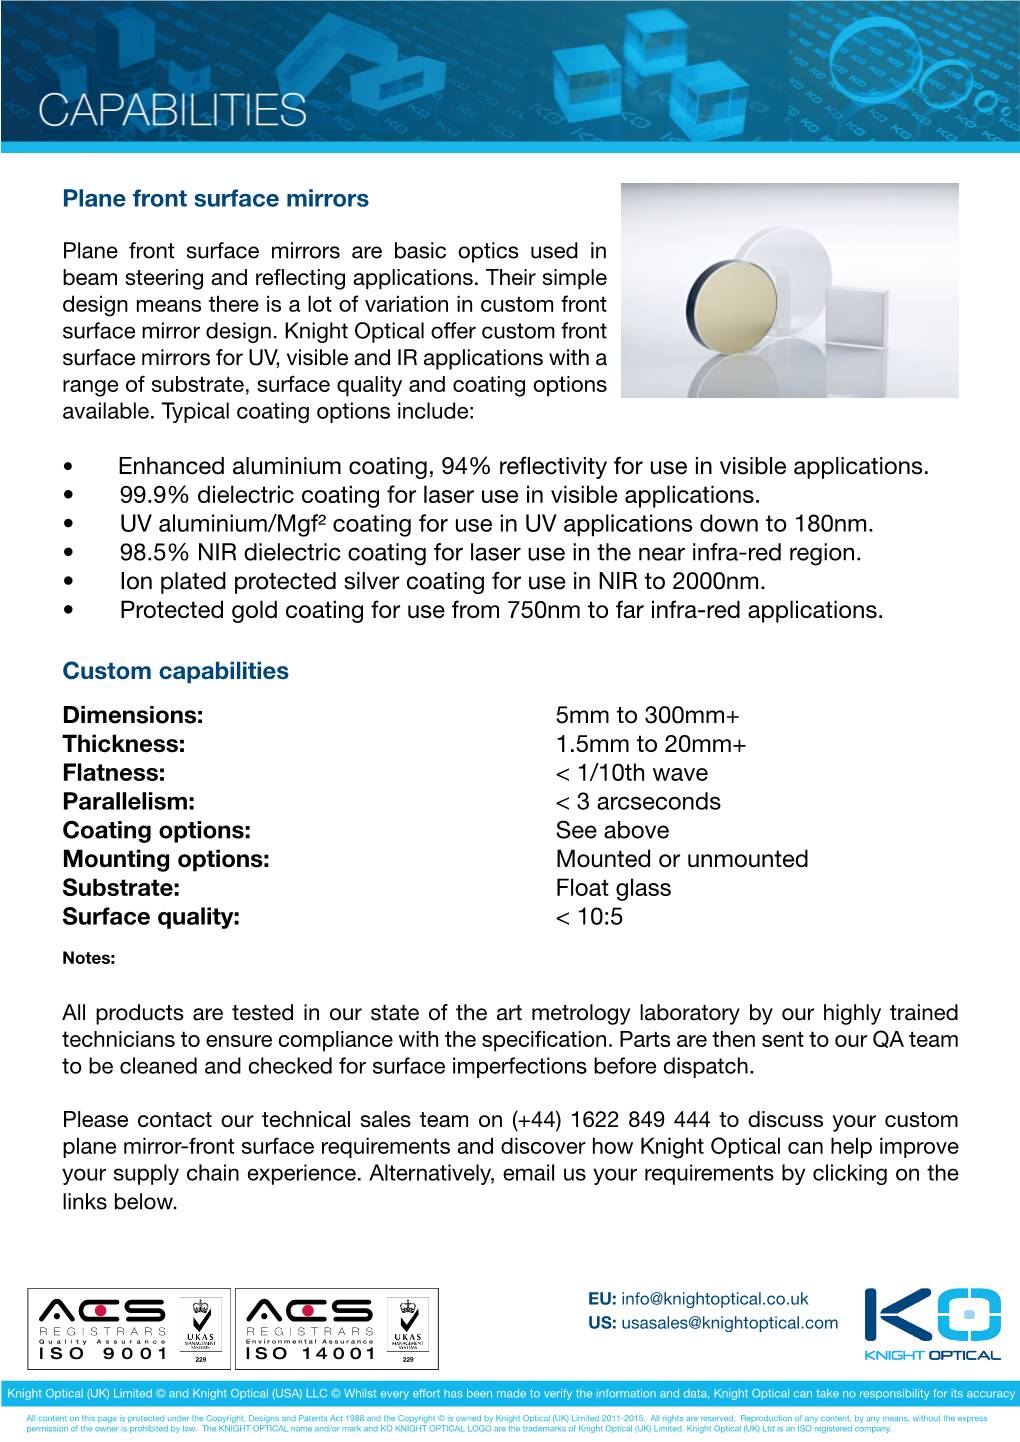 Plane Mirror-Front Surface Requirements and Discover How Knight Optical Can Help Improve Your Supply Chain Experience